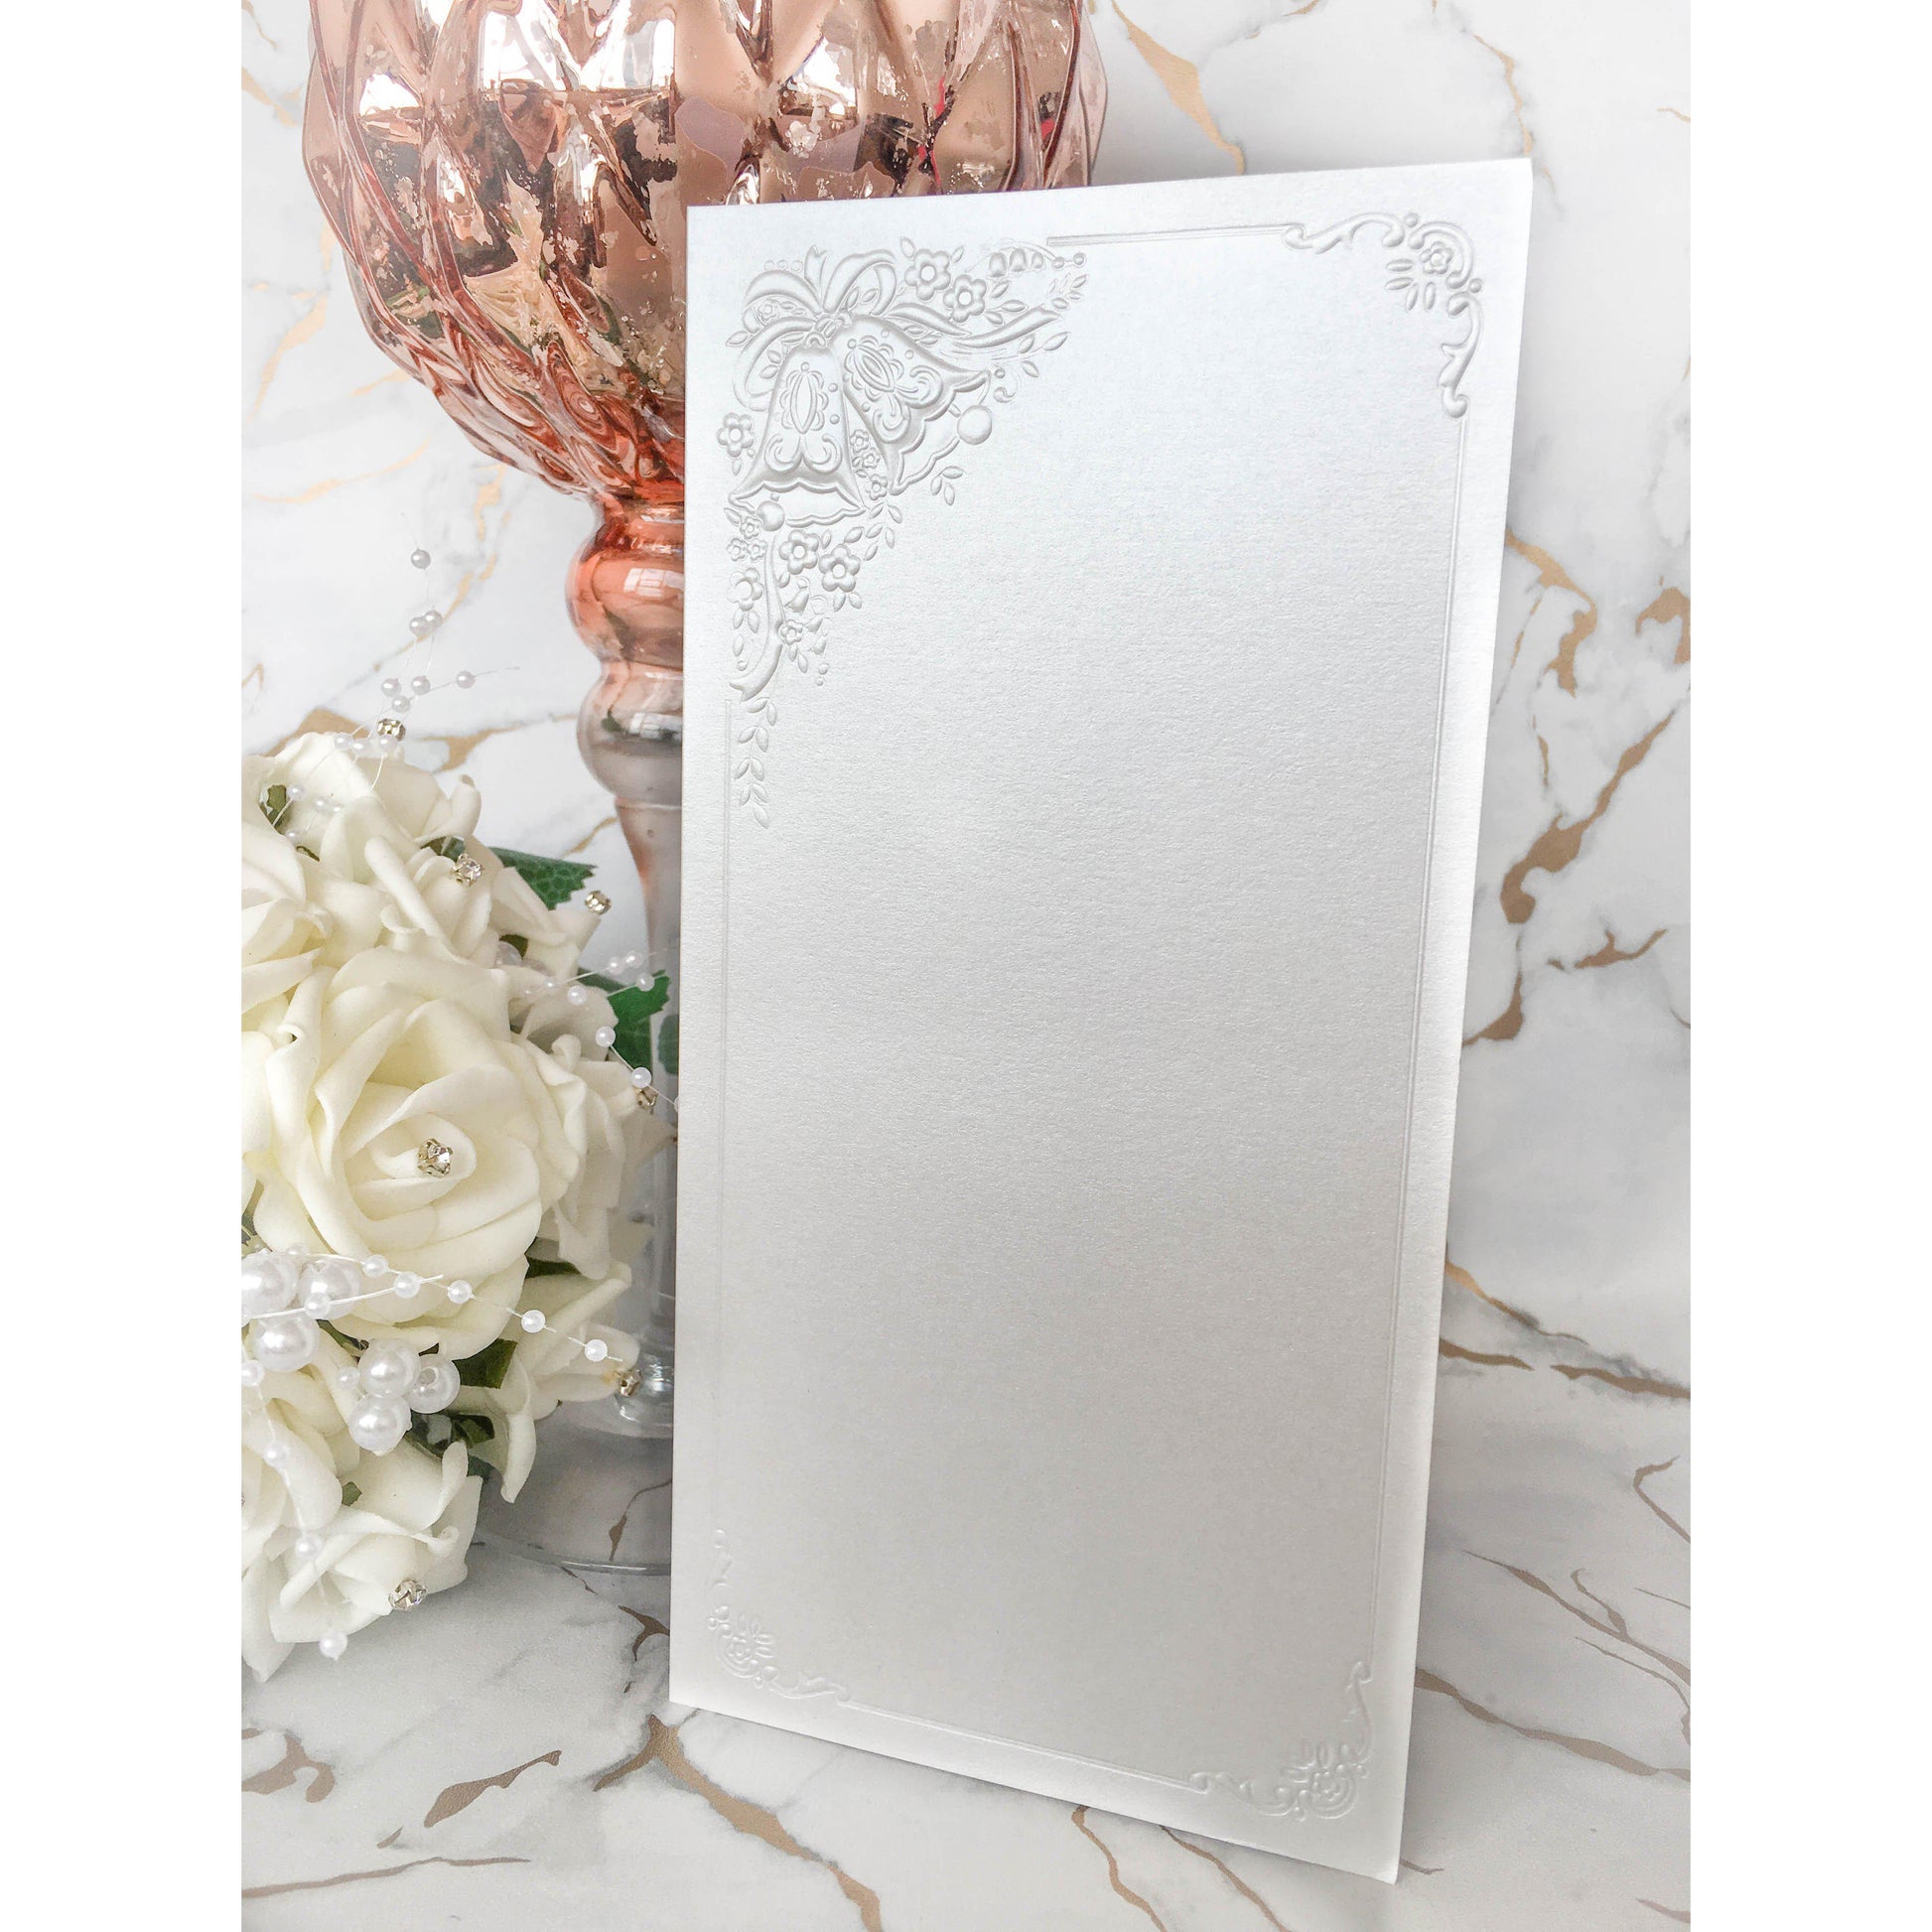 Tall DL Card Blanks White Pearl With Wedding Bells 10pk With Envelopes - Clearance-The Creative Bride